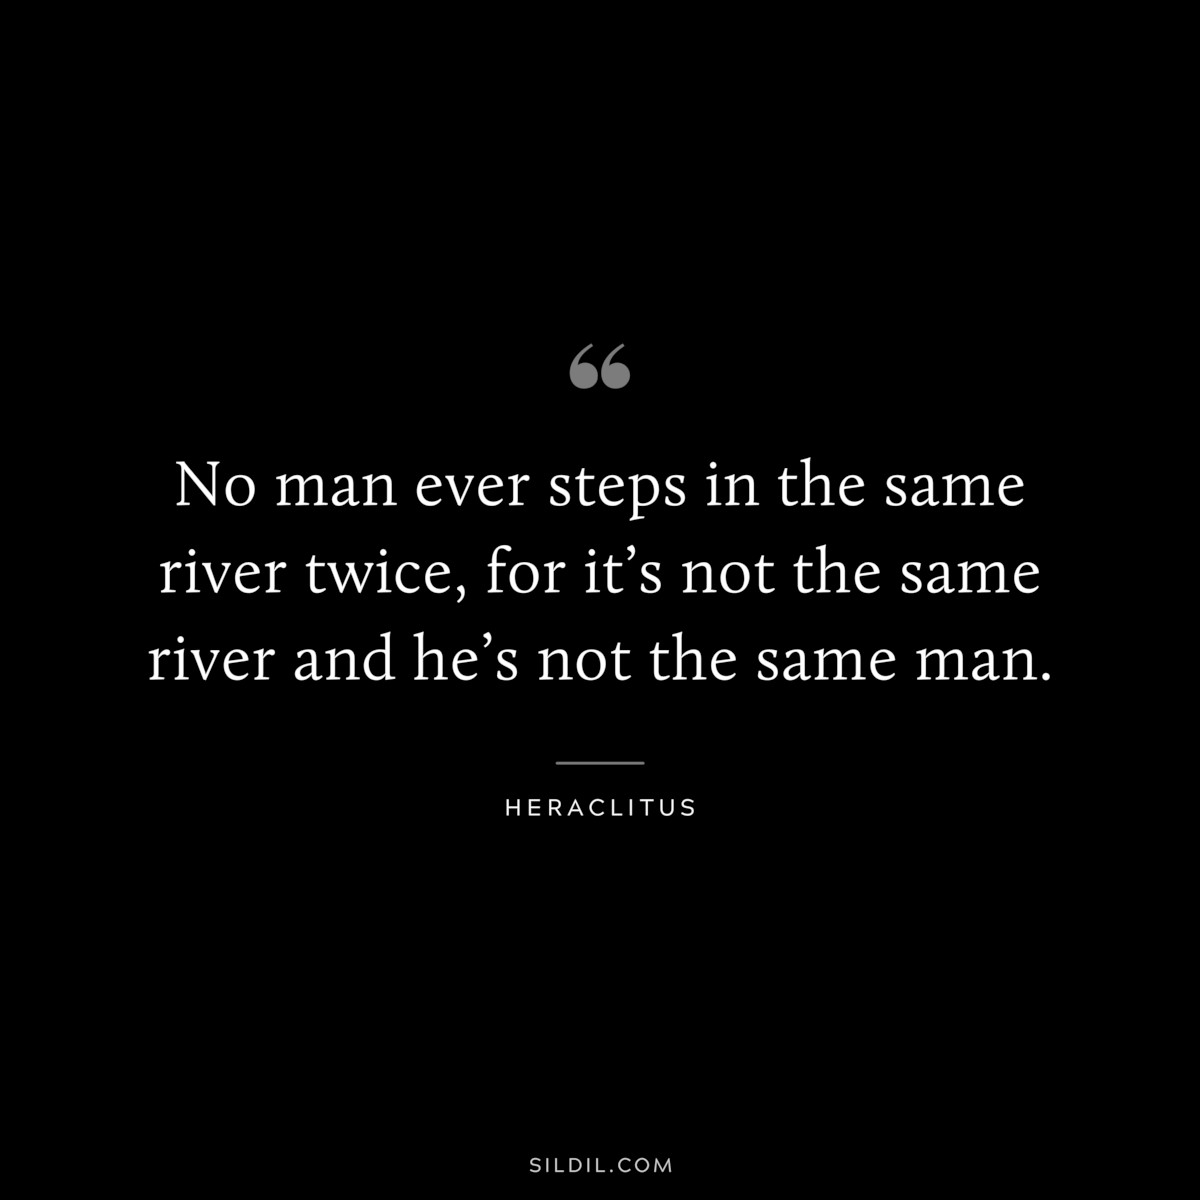 No man ever steps in the same river twice, for it’s not the same river and he’s not the same man. ― Heraclitus